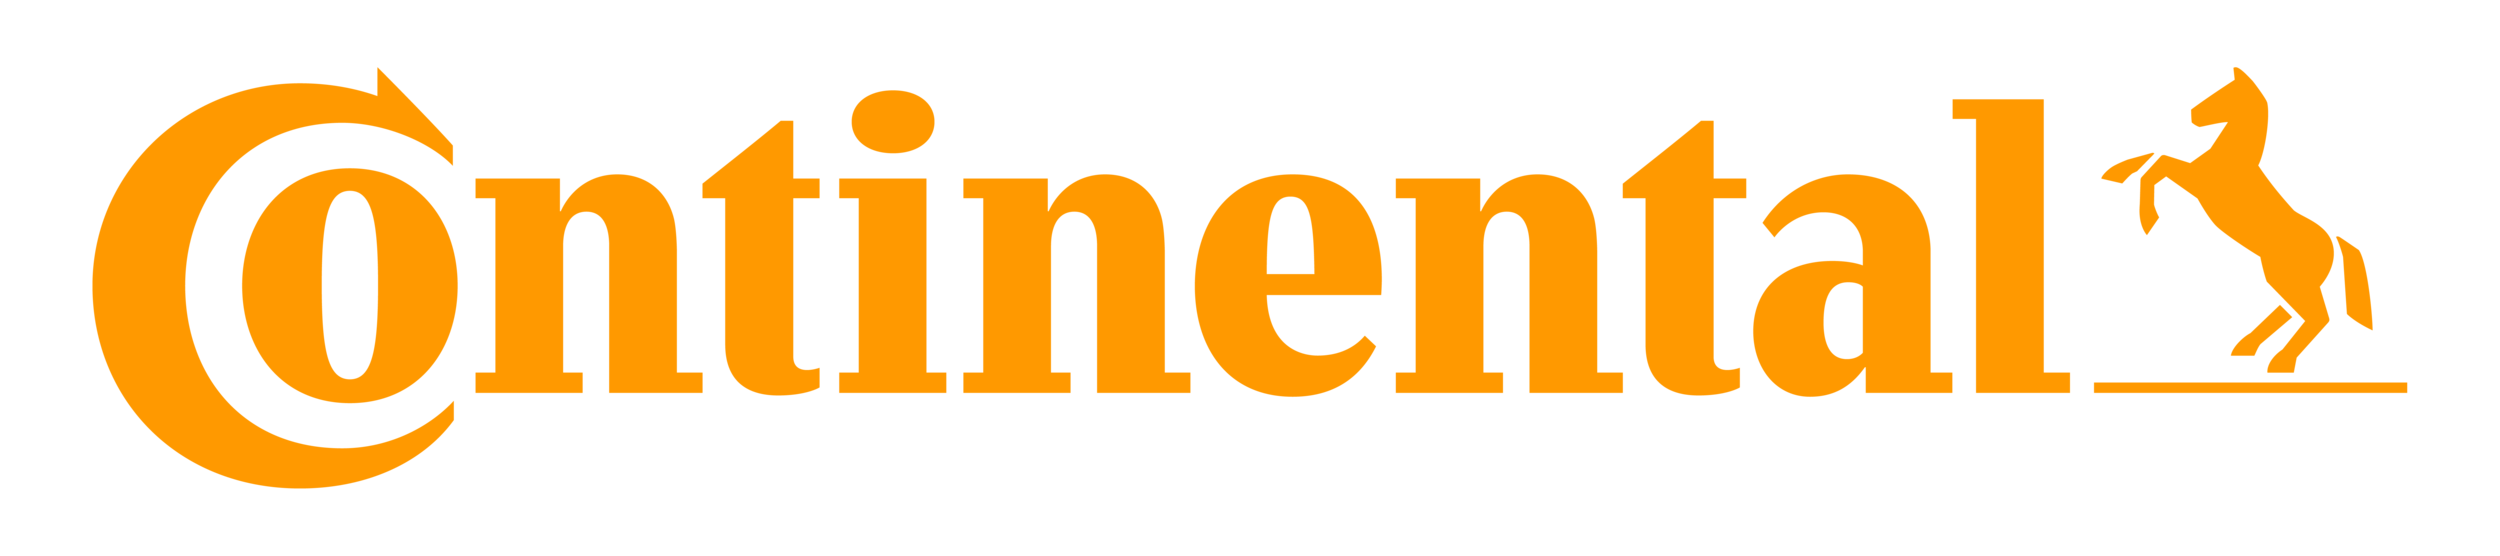 Continental-logo-9000x2000.png